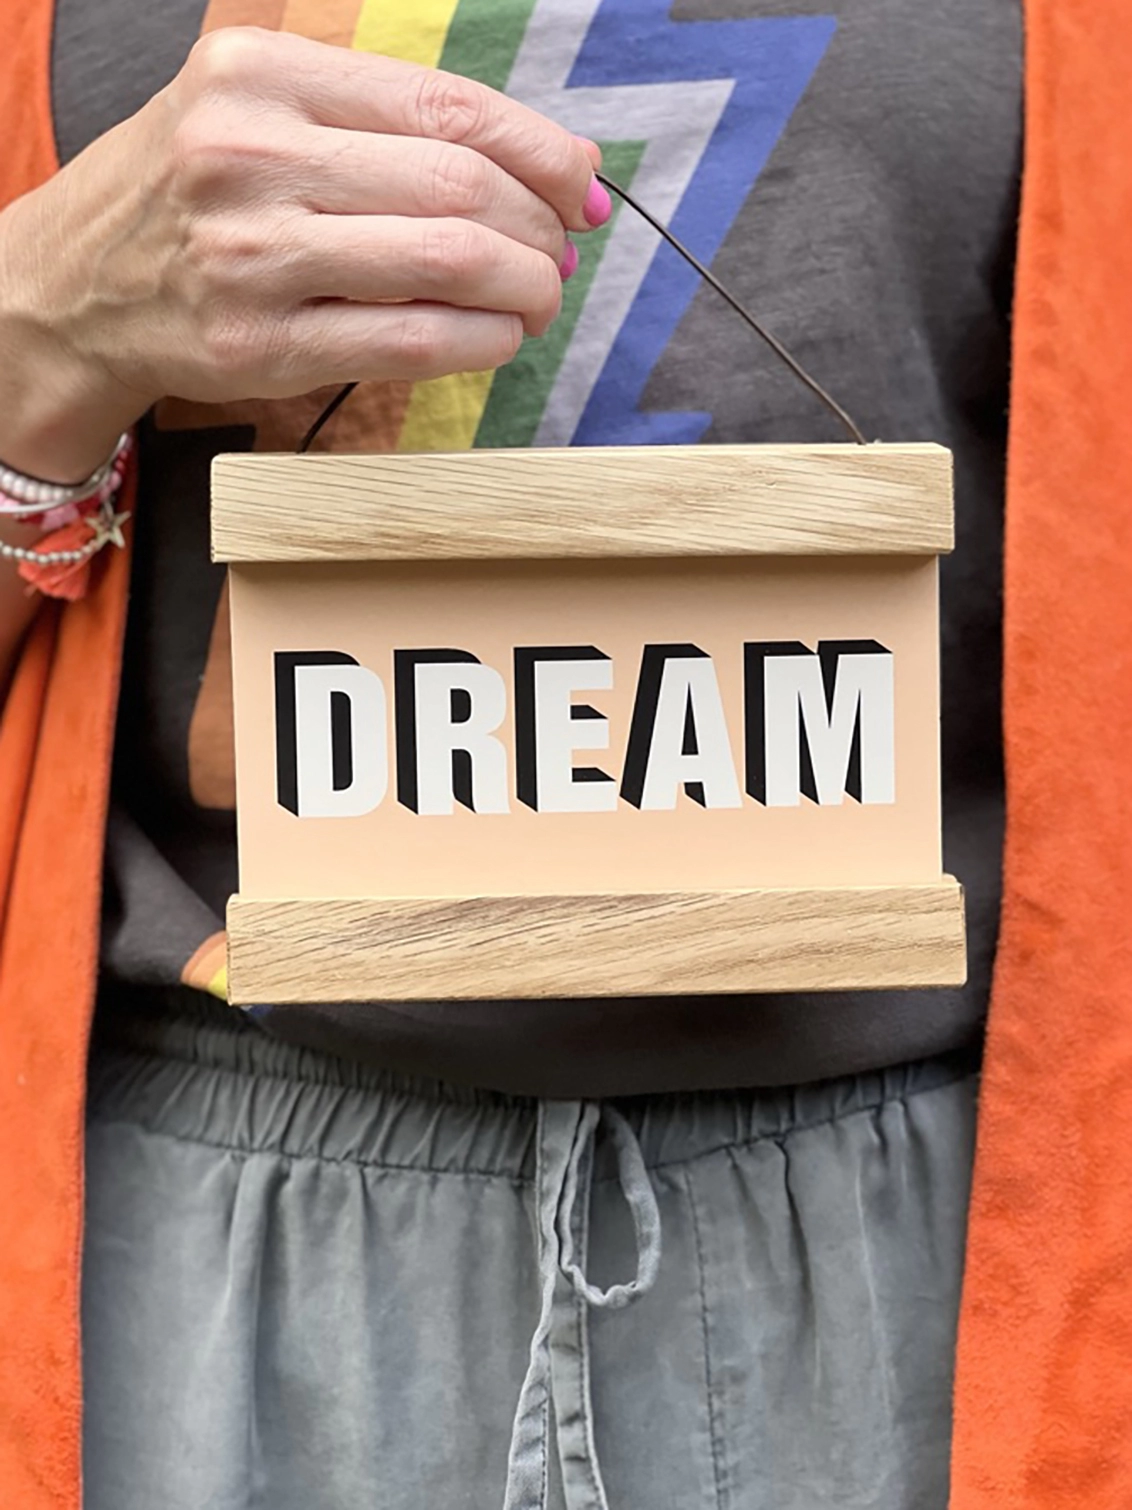 A print in peach colour with the word, DREAM framed in a oak hanger, with a waxed cotton cord for hanging being held by a hand with pink nail varnish 